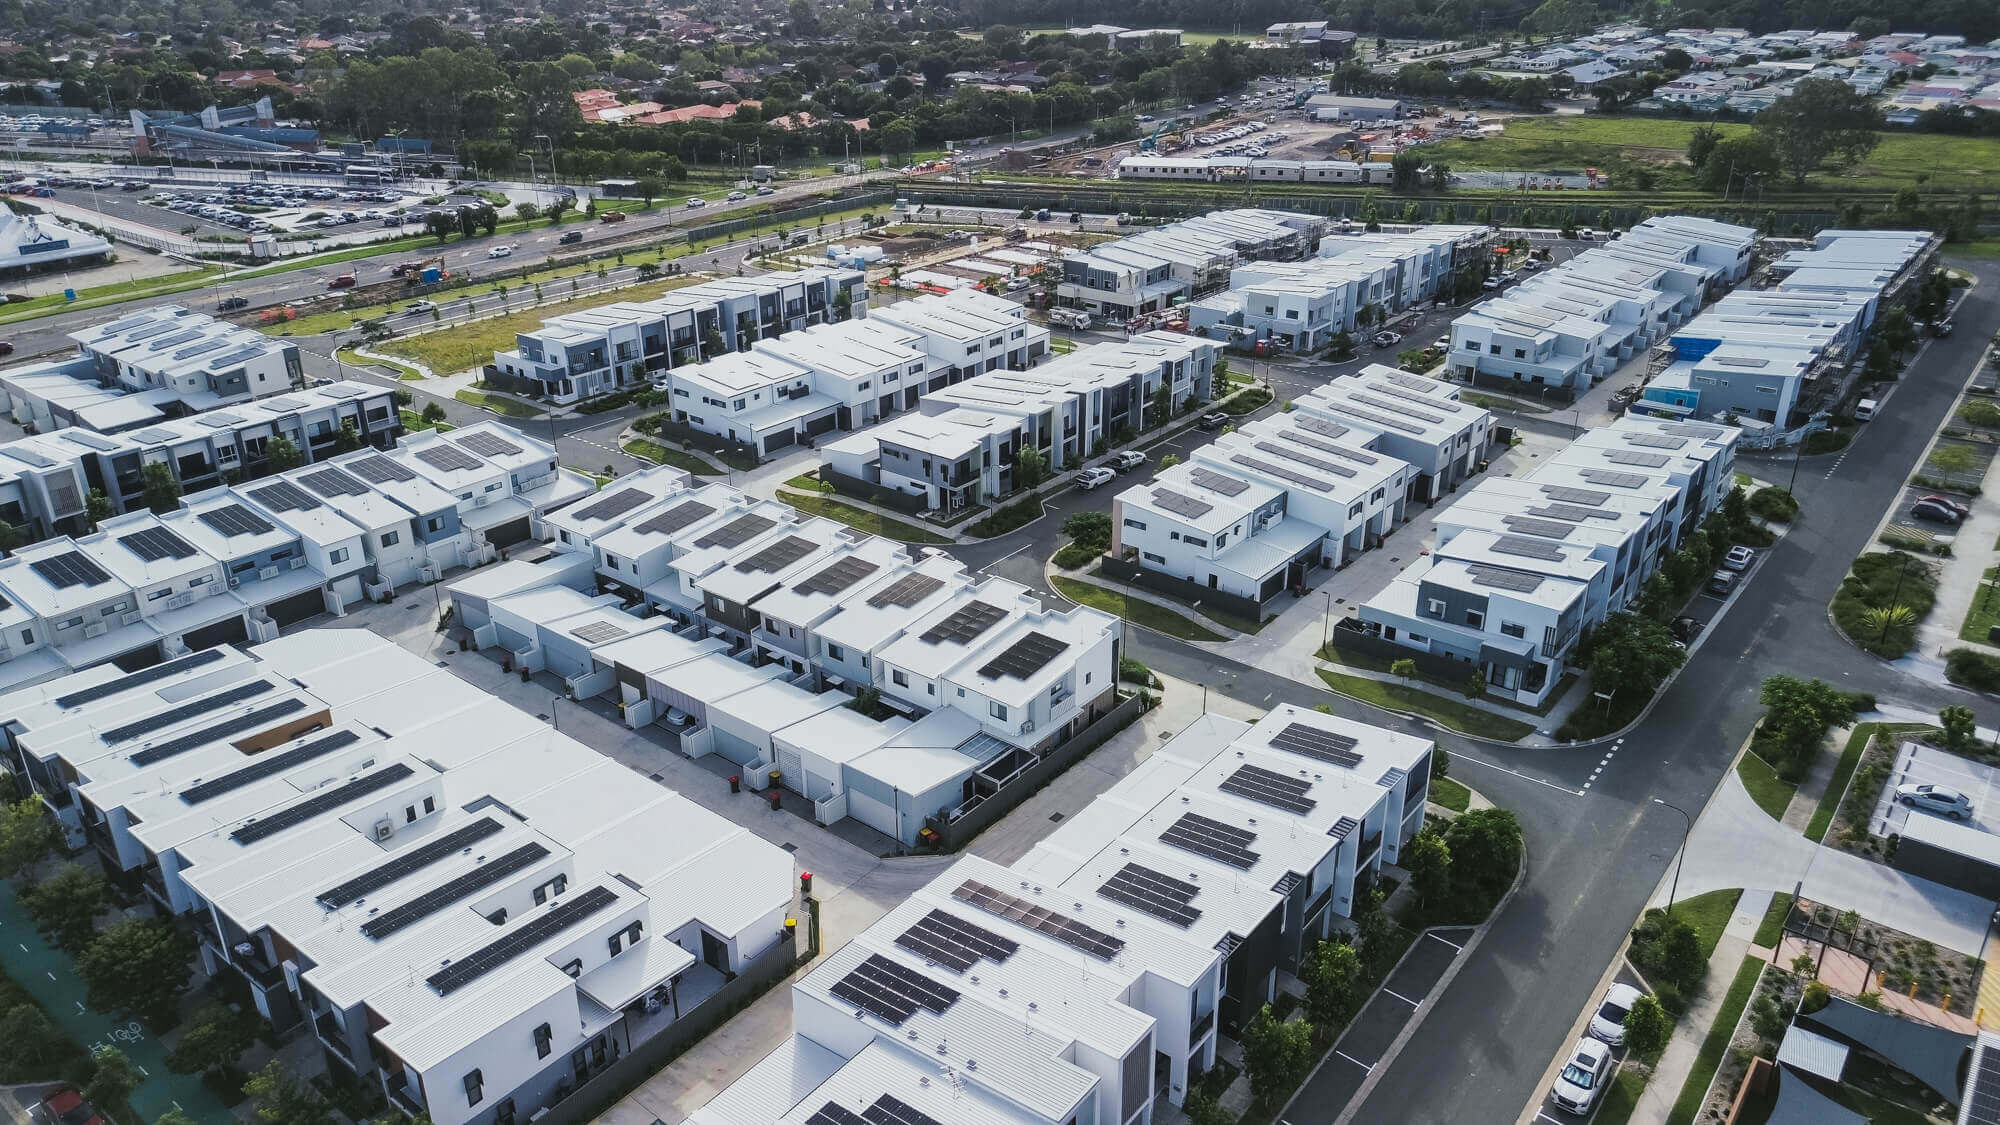 Aerial view of Carseldine Village, a residential development showcasing solar panels, harnessing renewable energy for sustainable living.